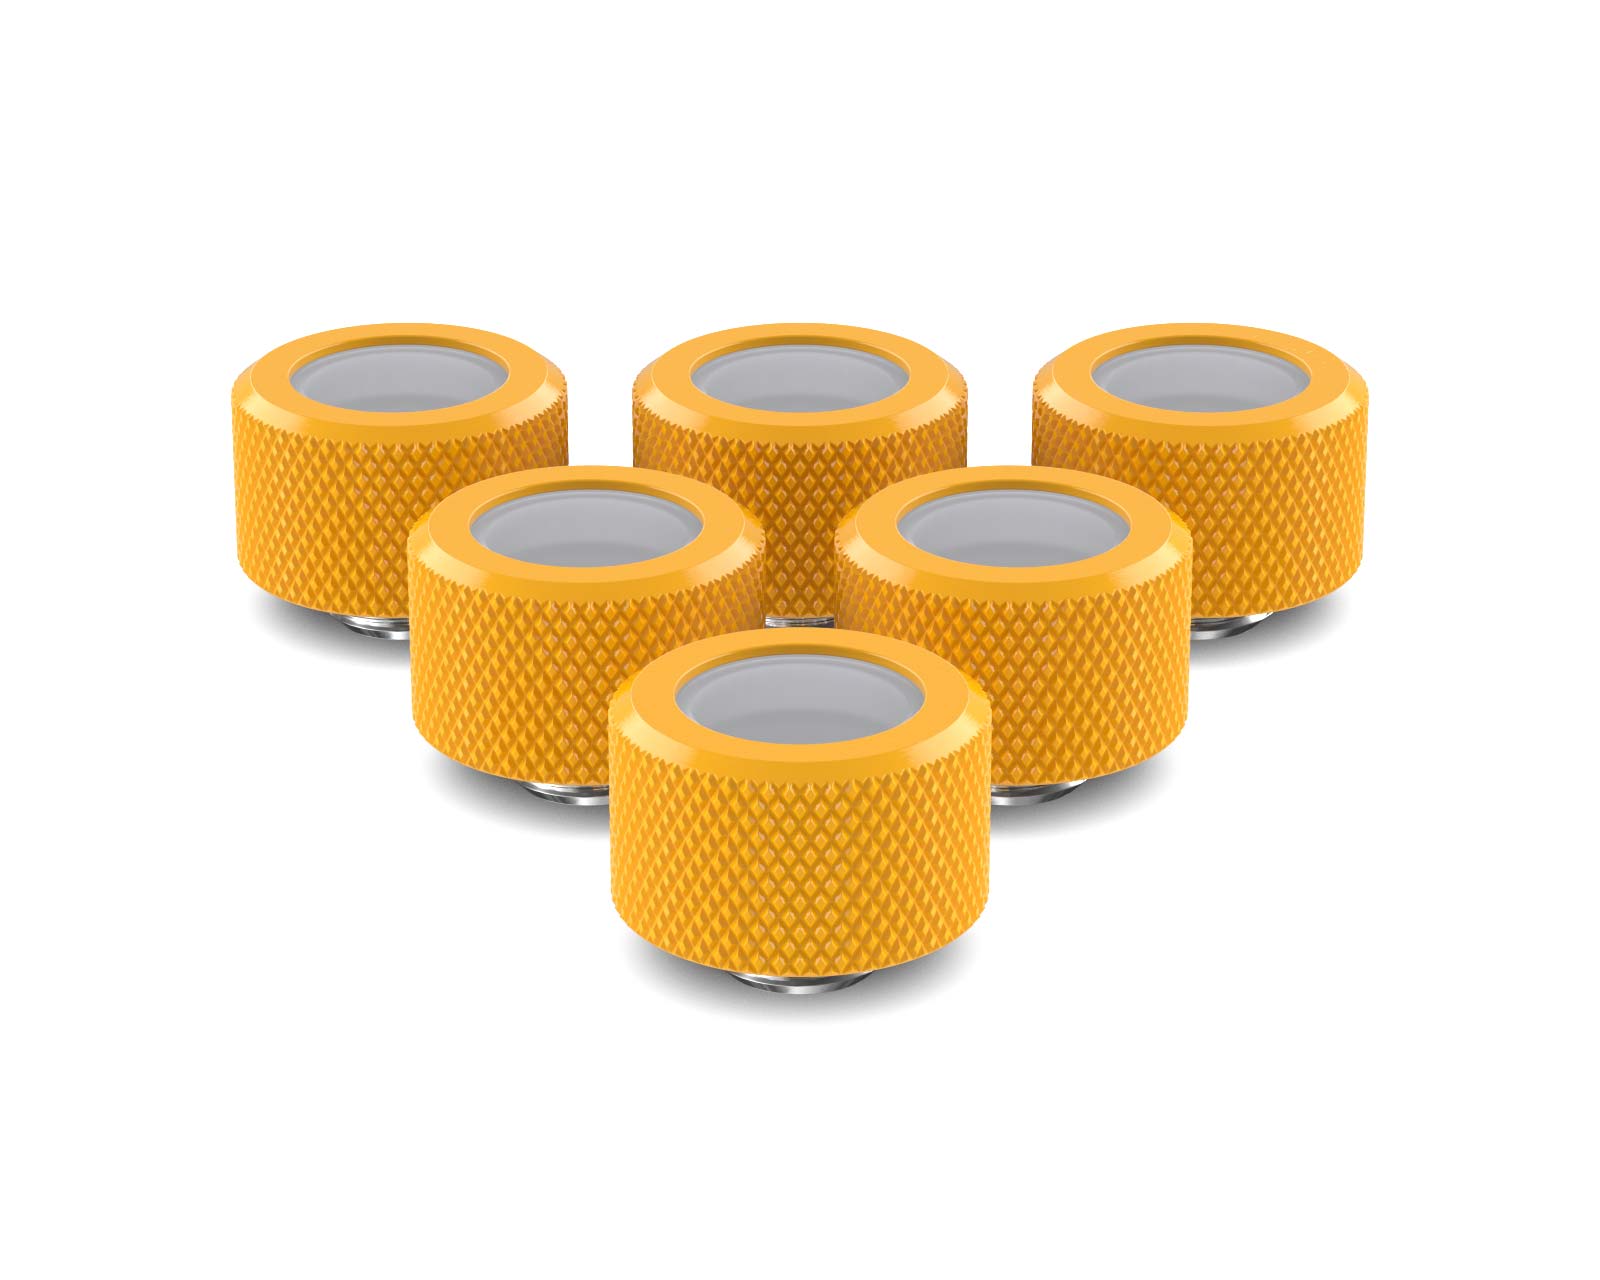 PrimoChill 16mm OD Rigid SX Fitting - 6 Pack - PrimoChill - KEEPING IT COOL Yellow